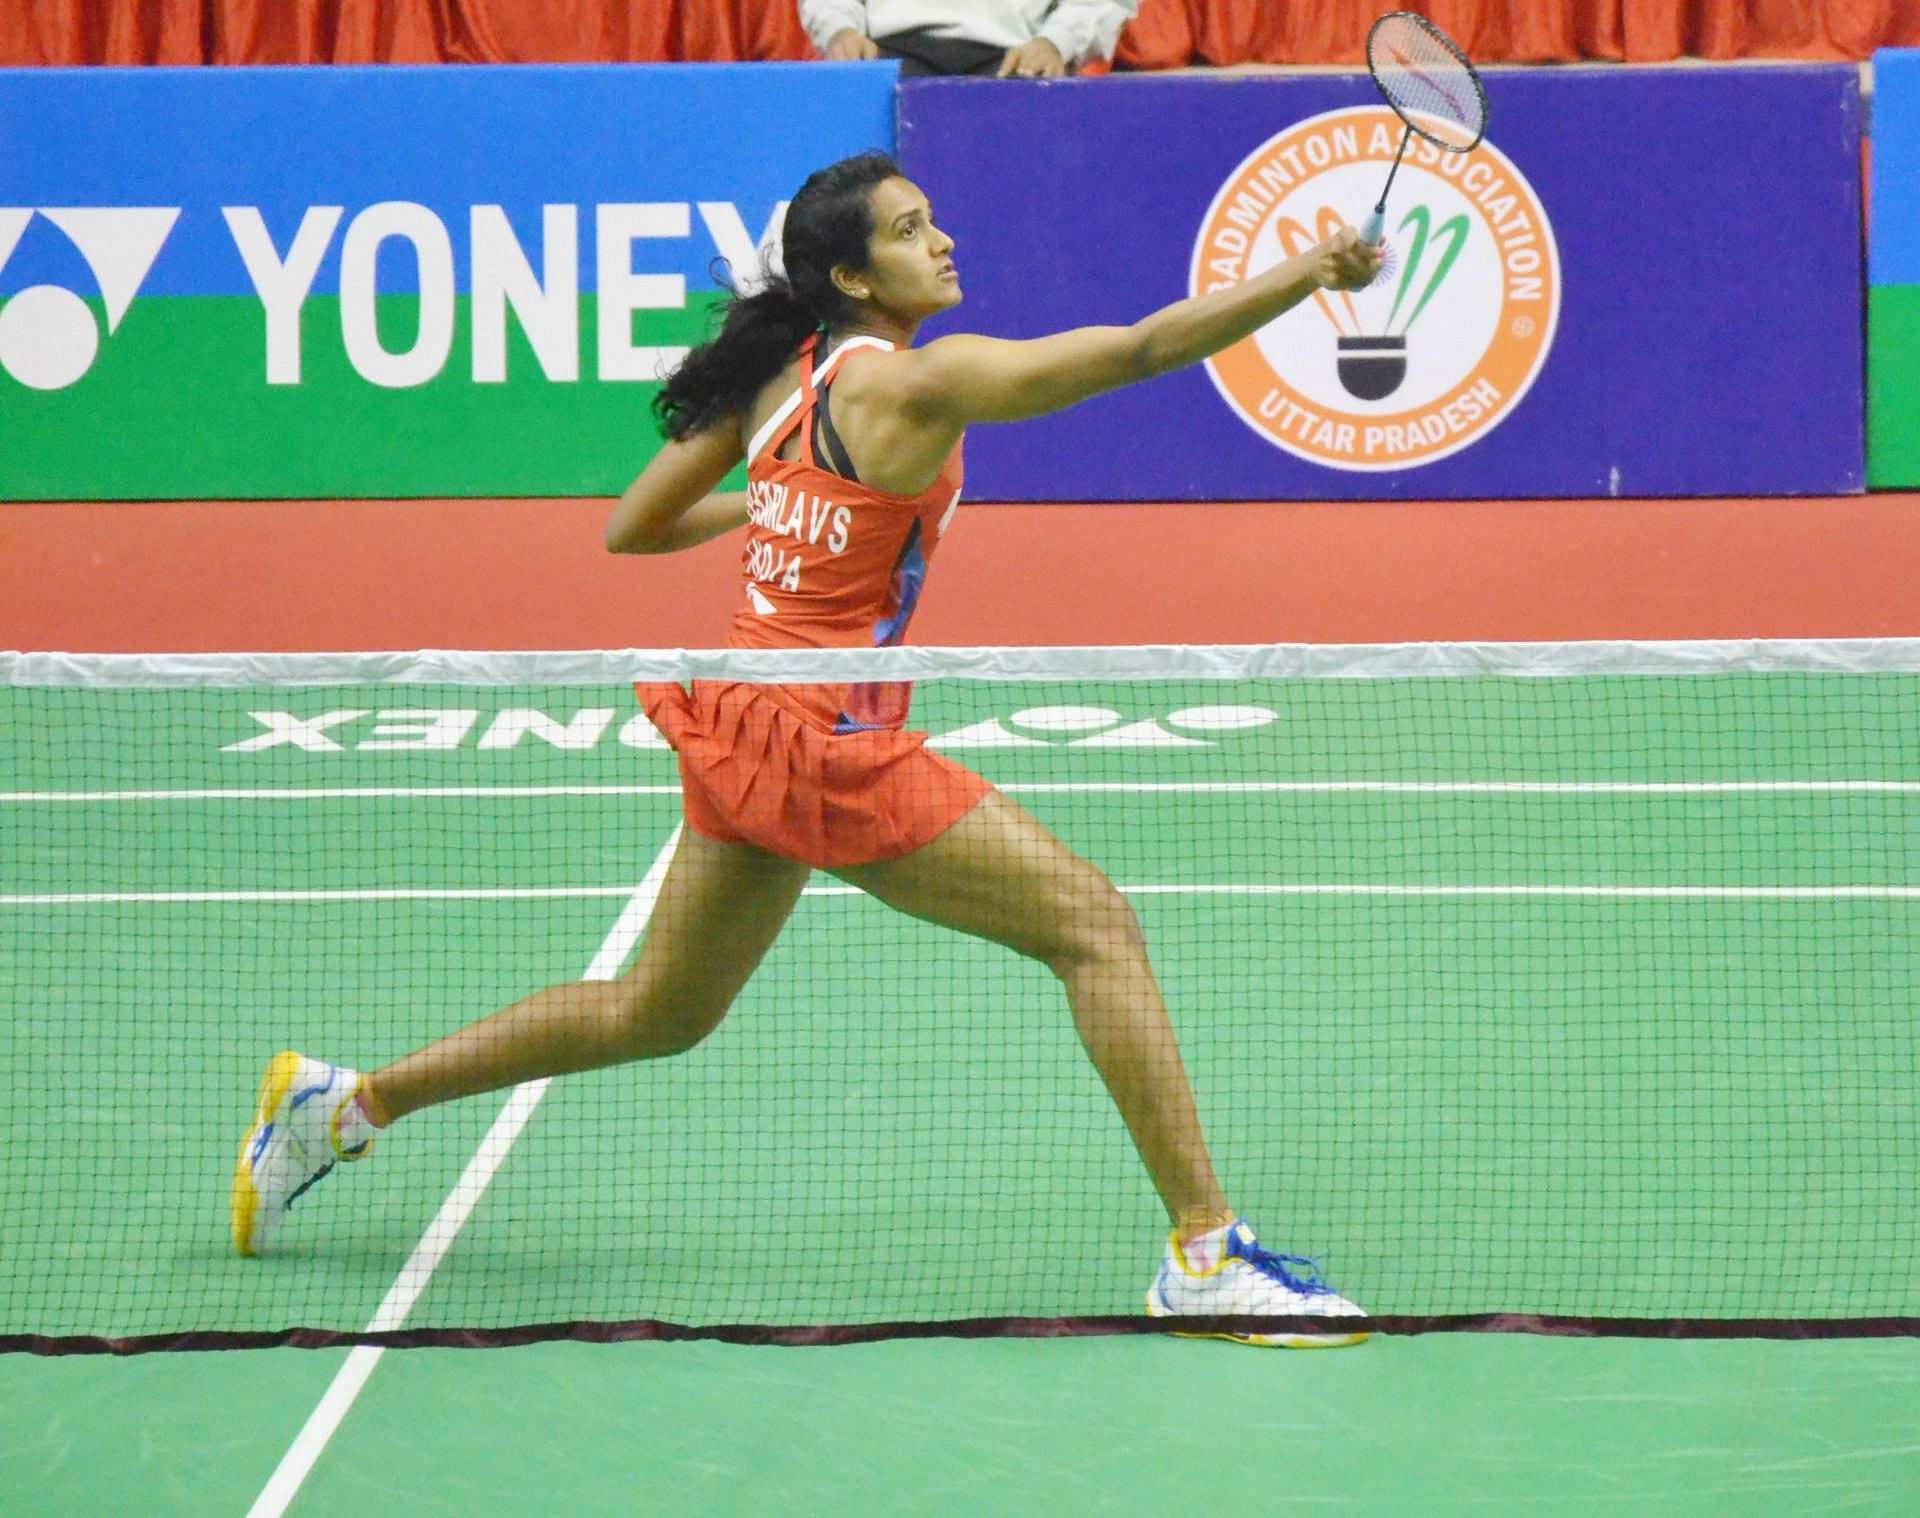 Sixth seed PV Sindhu will face world no. 17 Wang Zhi Yi in the first round. (Picture: BAI)